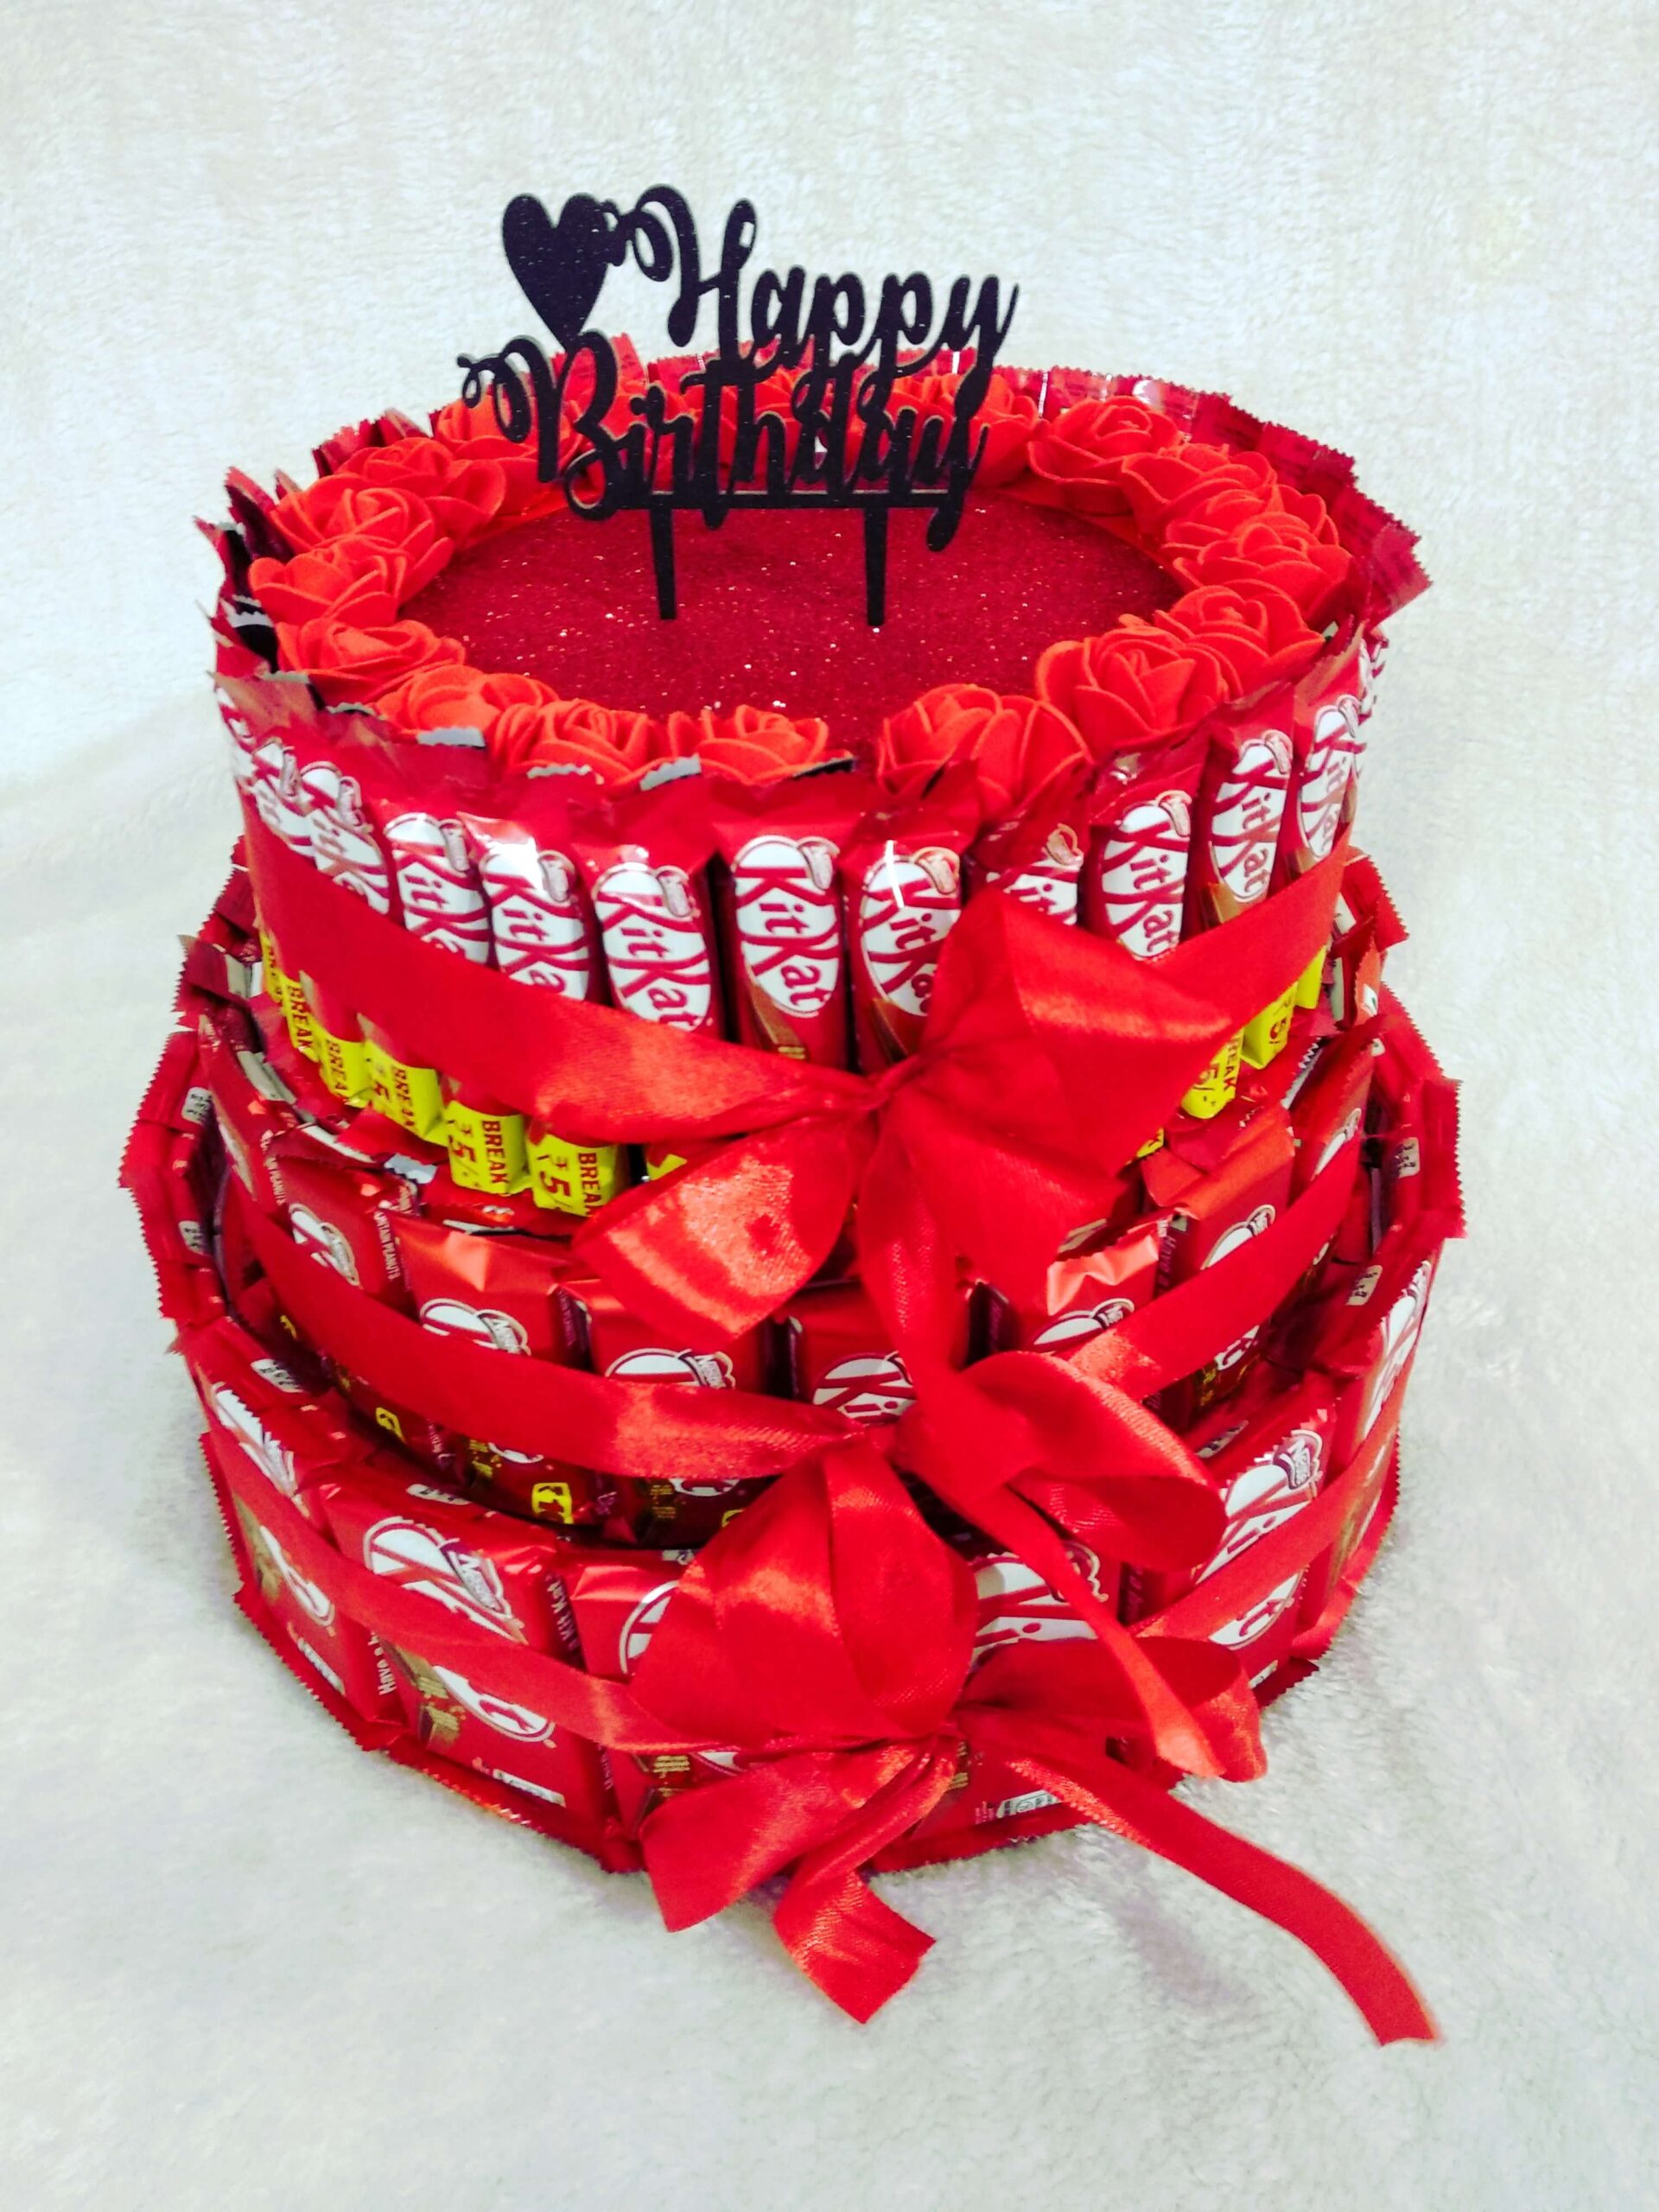 Special Valentine gift | Gift For Girlfriend/Boyfriend | Valentine Special Gift | Romantic Valentine Day Gift | 3 Layered Chocolate Bouquet – Everlasting Memories